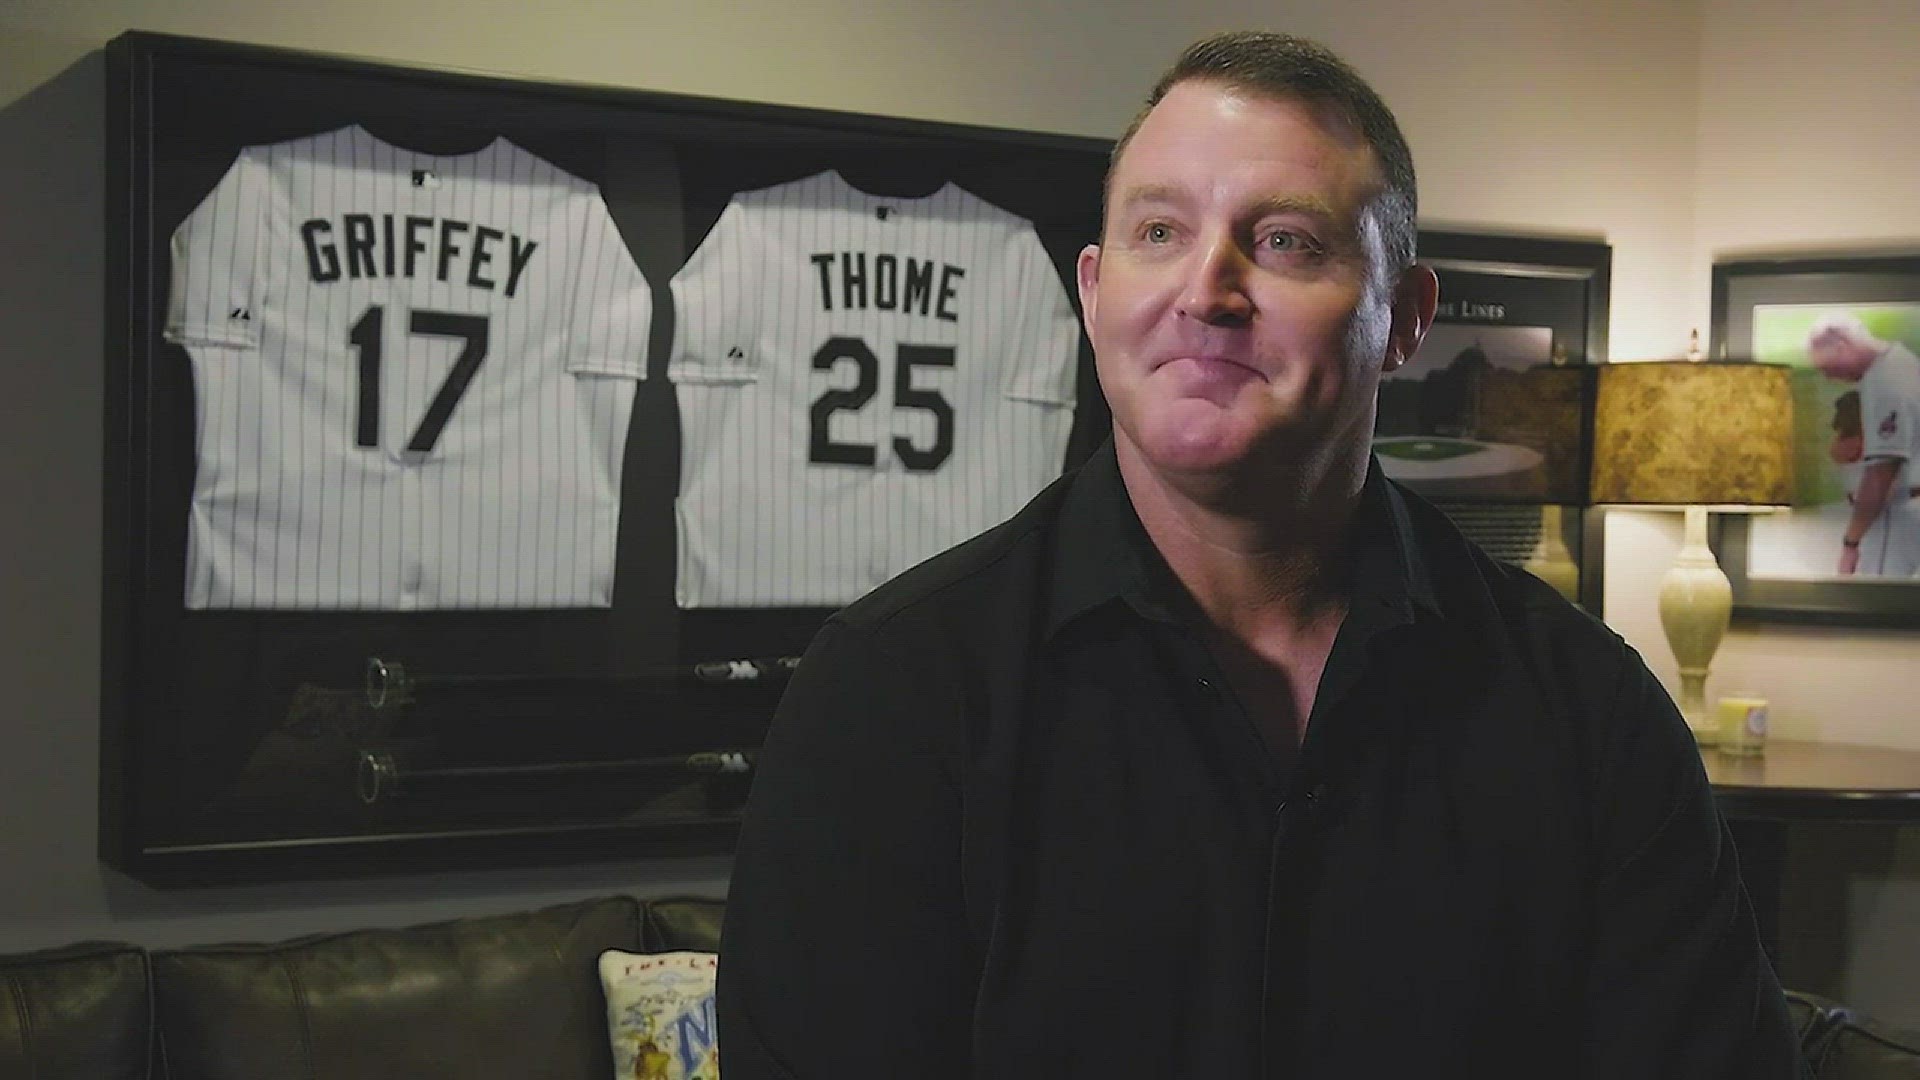 Indians great and fan favorite Jim Thome elected to Baseball Hall